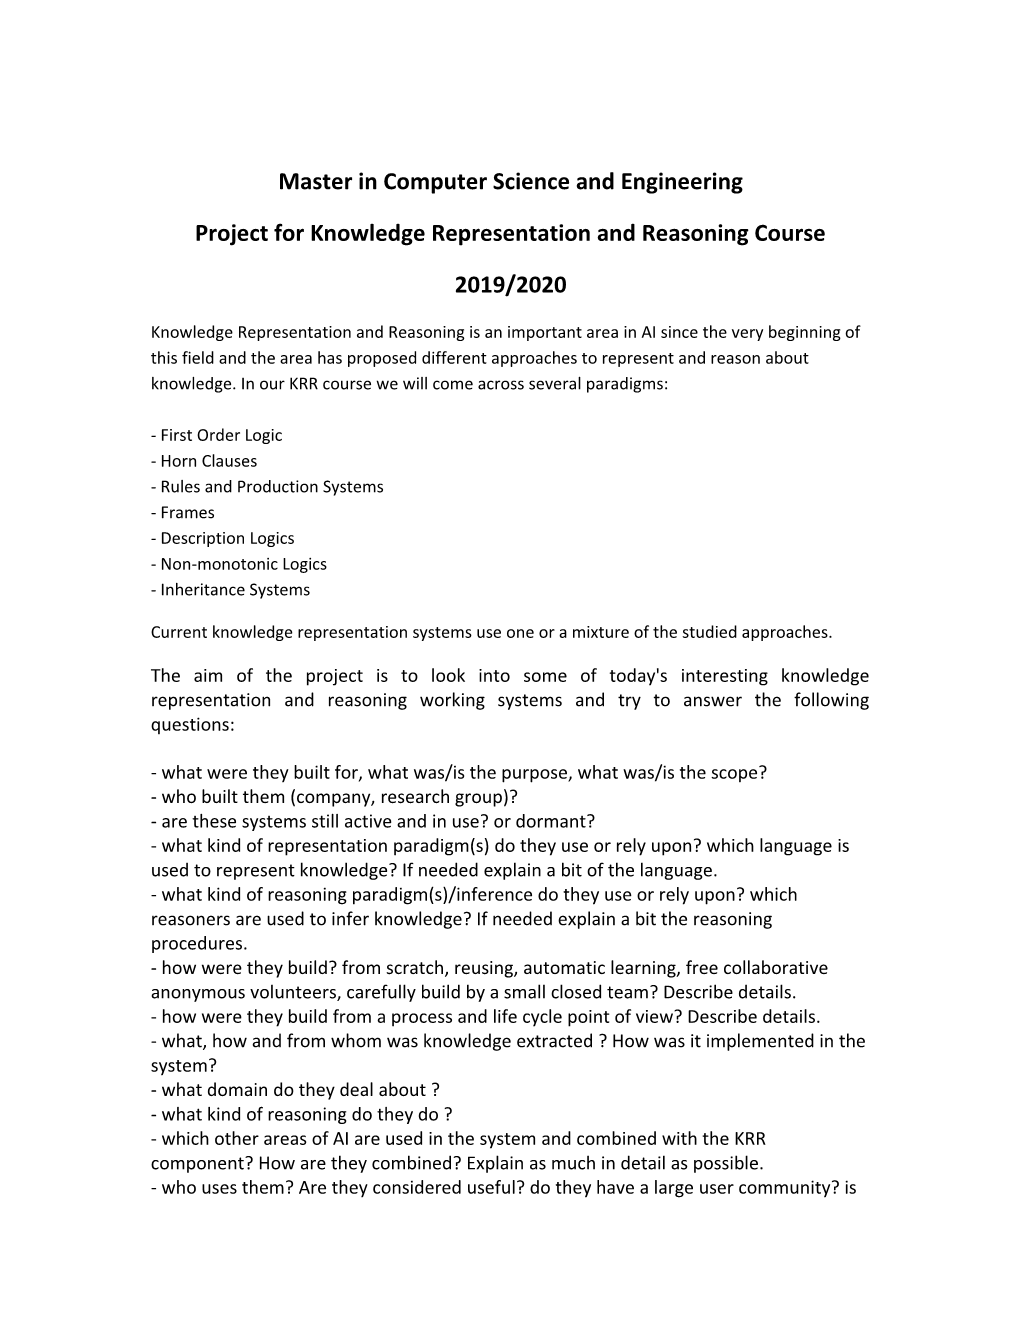 Master in Computer Science and Engineering Project for Knowledge